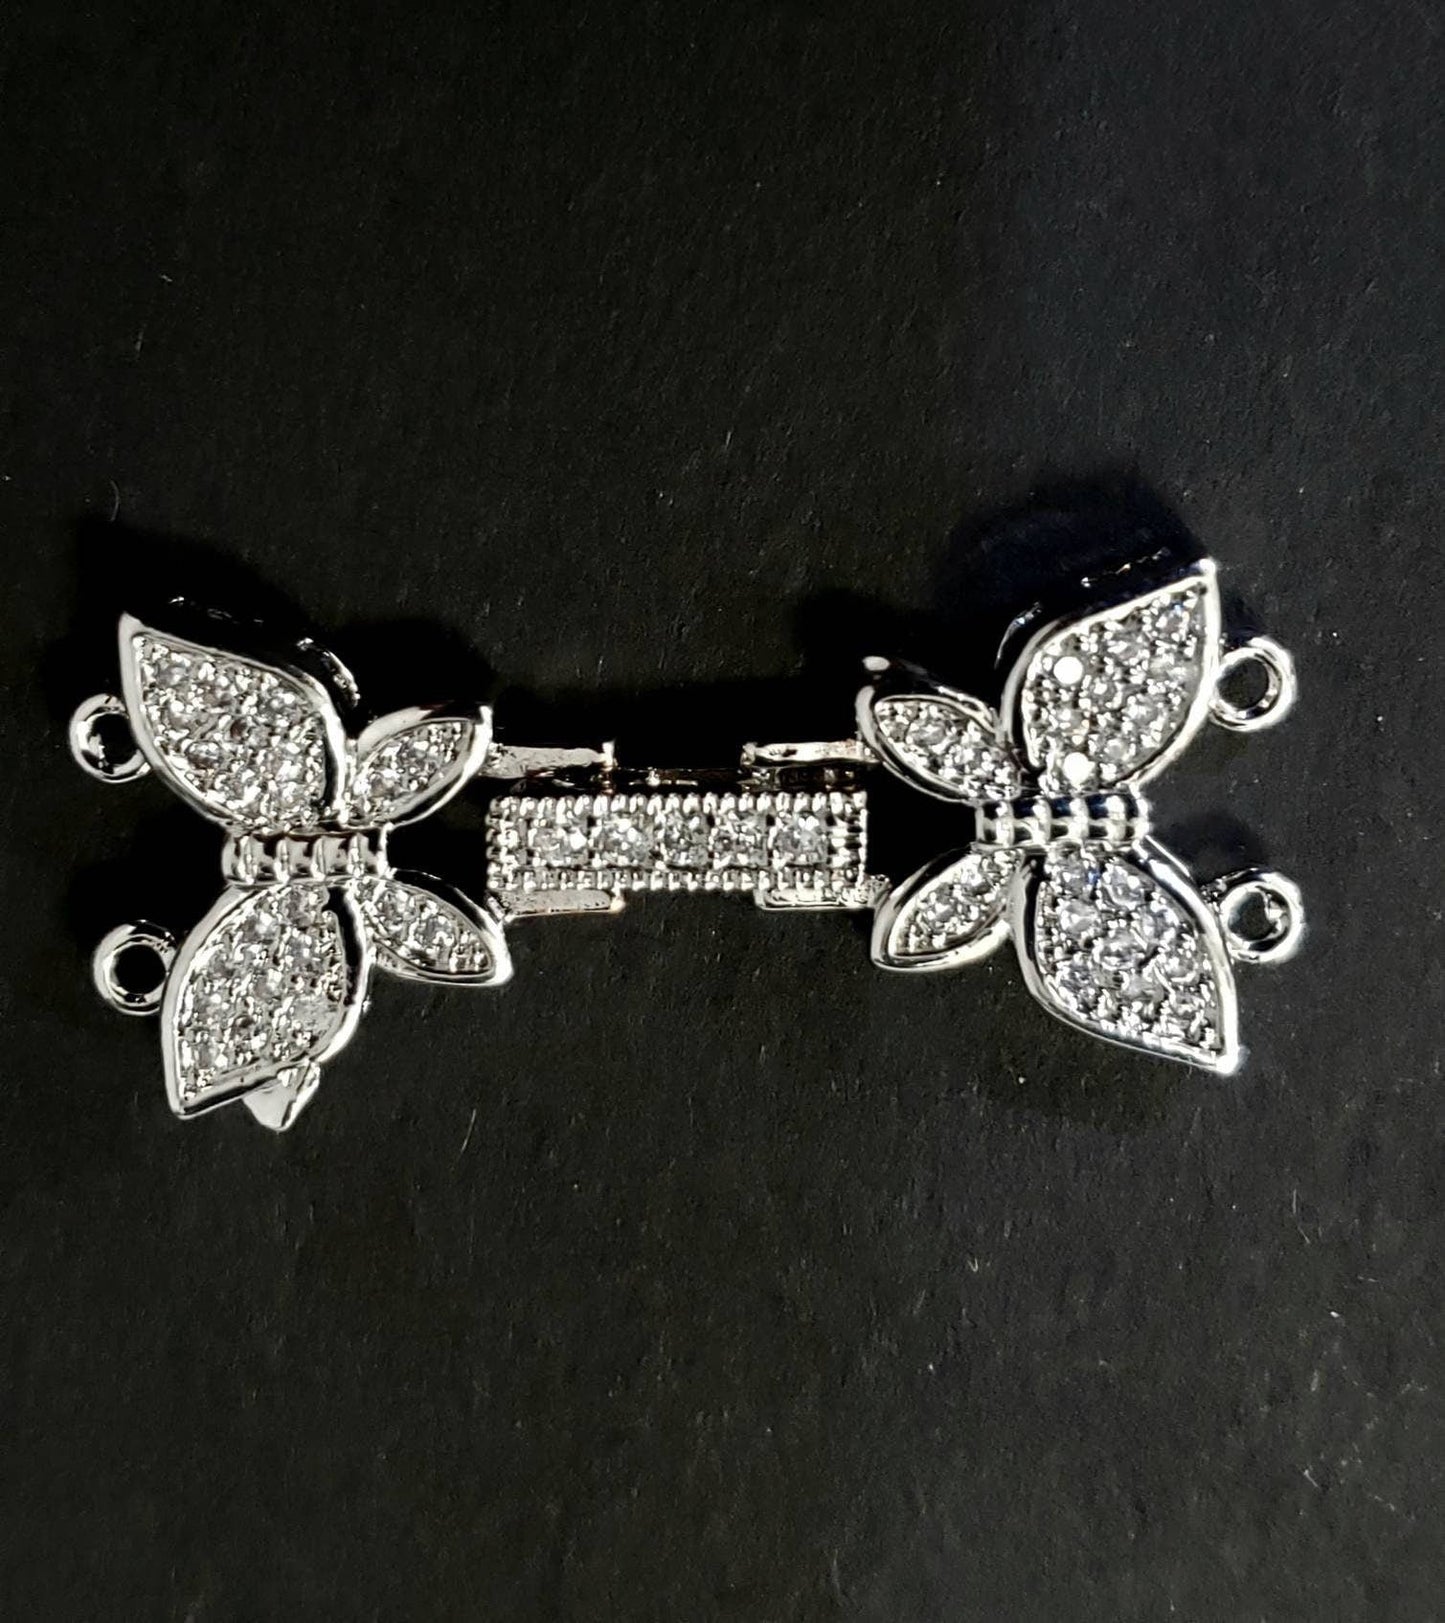 Cubic Zirconia CZ Micro Pave Rhodium Sterling Silver Diamond Style Butterfly Fancy Clasp 14x31mm long, High End Jewelry Making,Folding Clasp